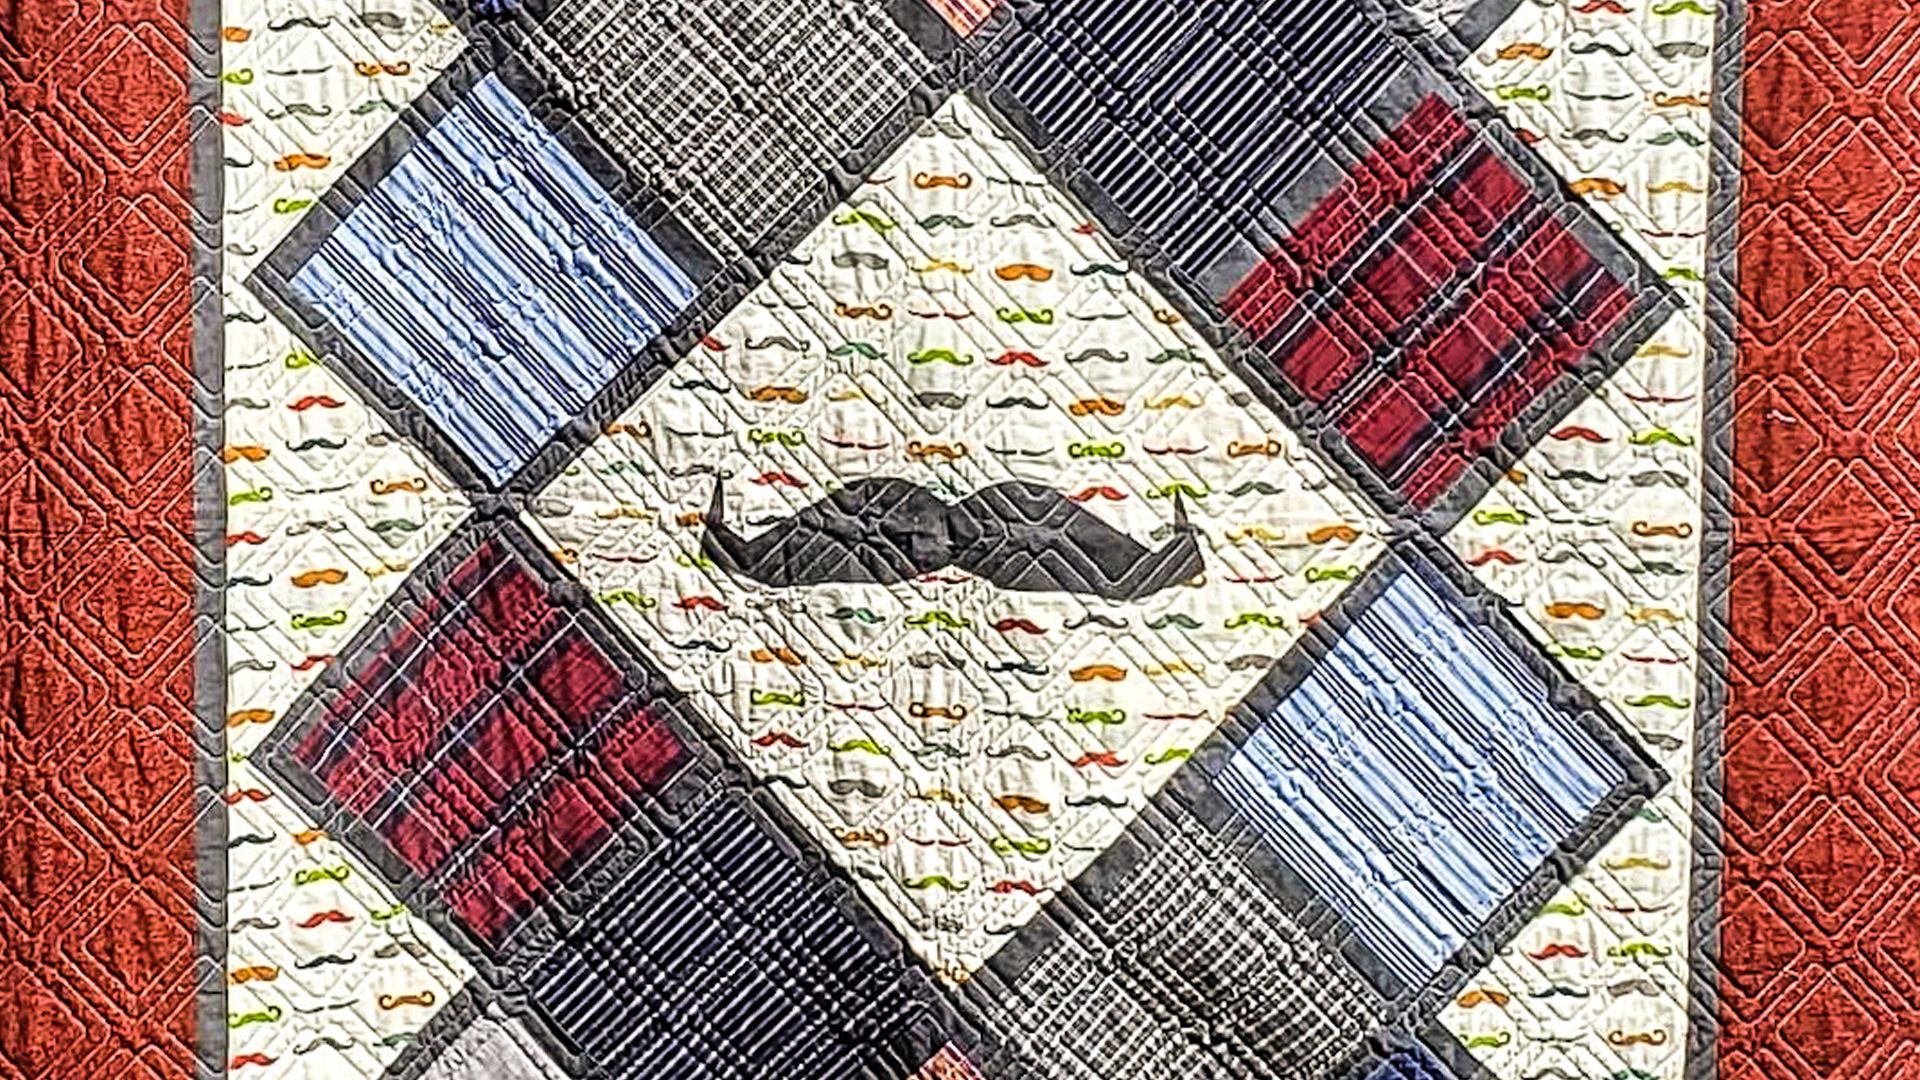 Someone holds up a quilt, with a large moustache quilted onto the middle of it